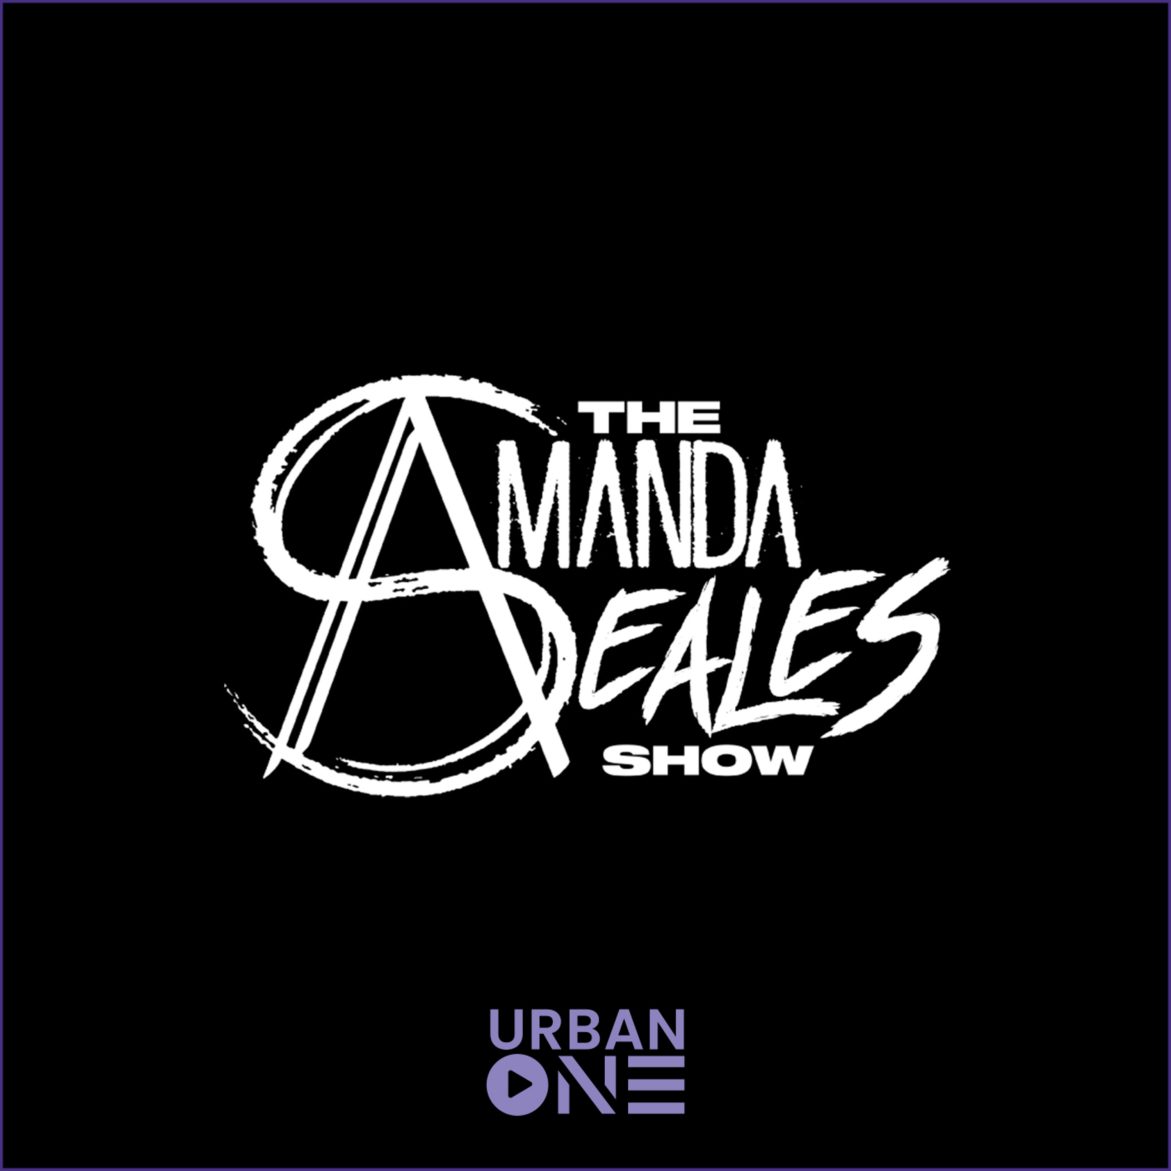 Black Podcasting - Snoop Dogg’s Controversial Thoughts On Trump, Mommy and Me Pole Dancing, Plies on Biden’s Age, and More from The Amanda Seales Show